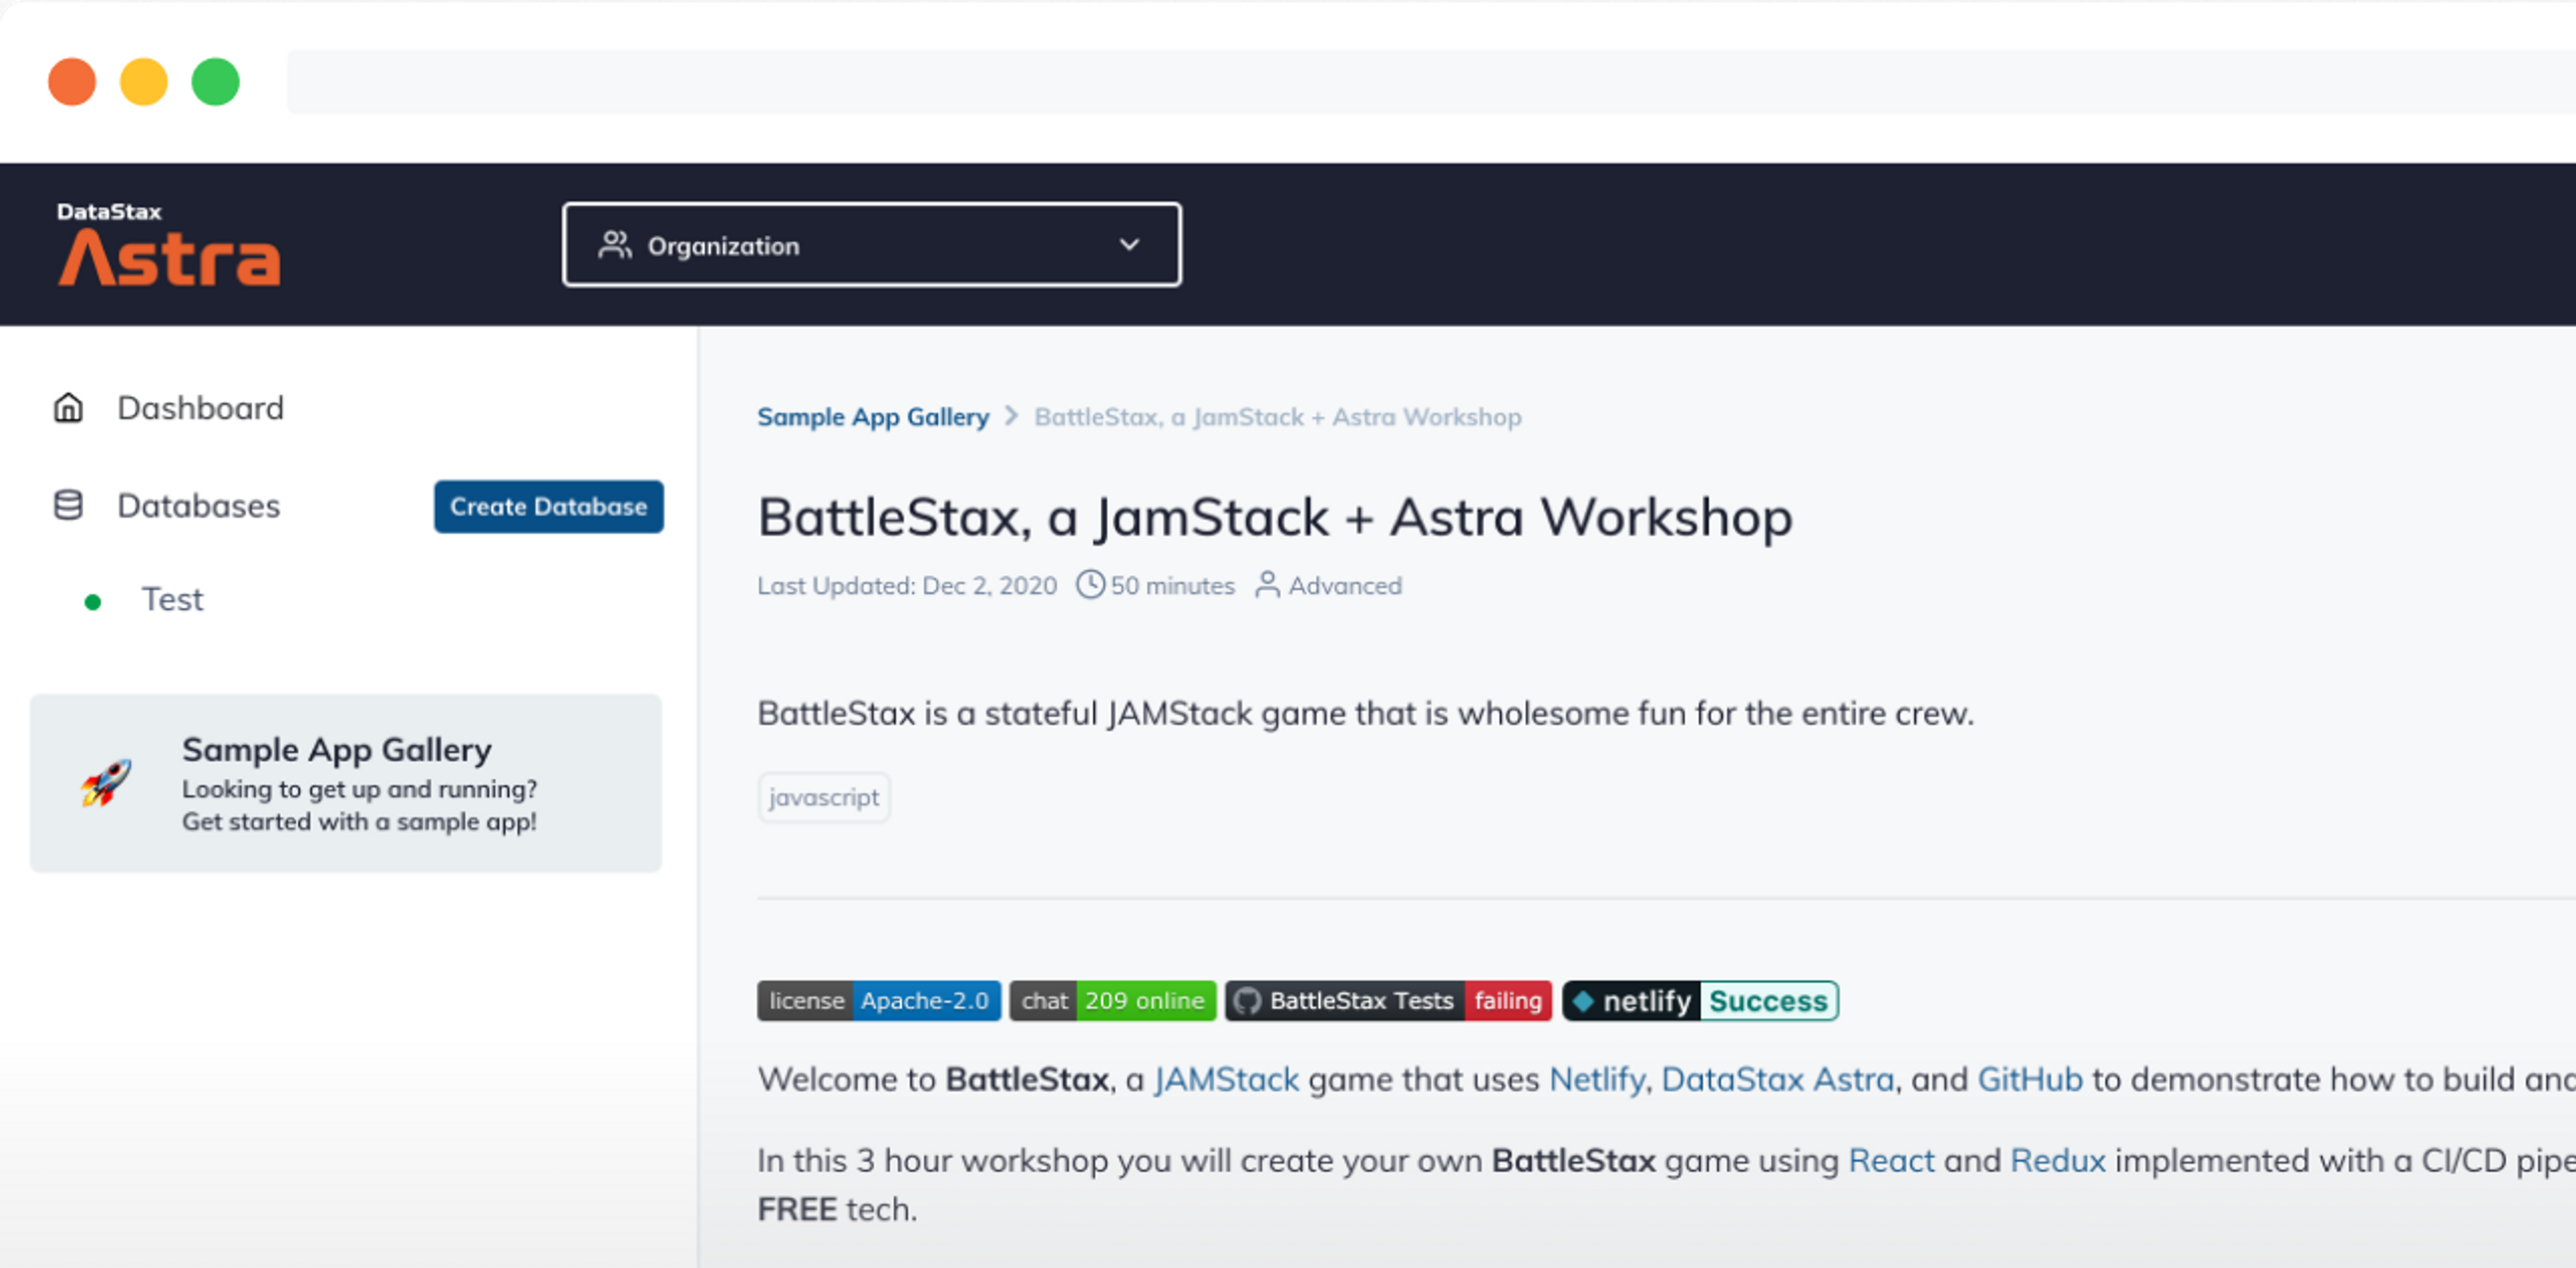 Explore The Stargate Document API In DataStax Astra With The Battlestax Sample App.